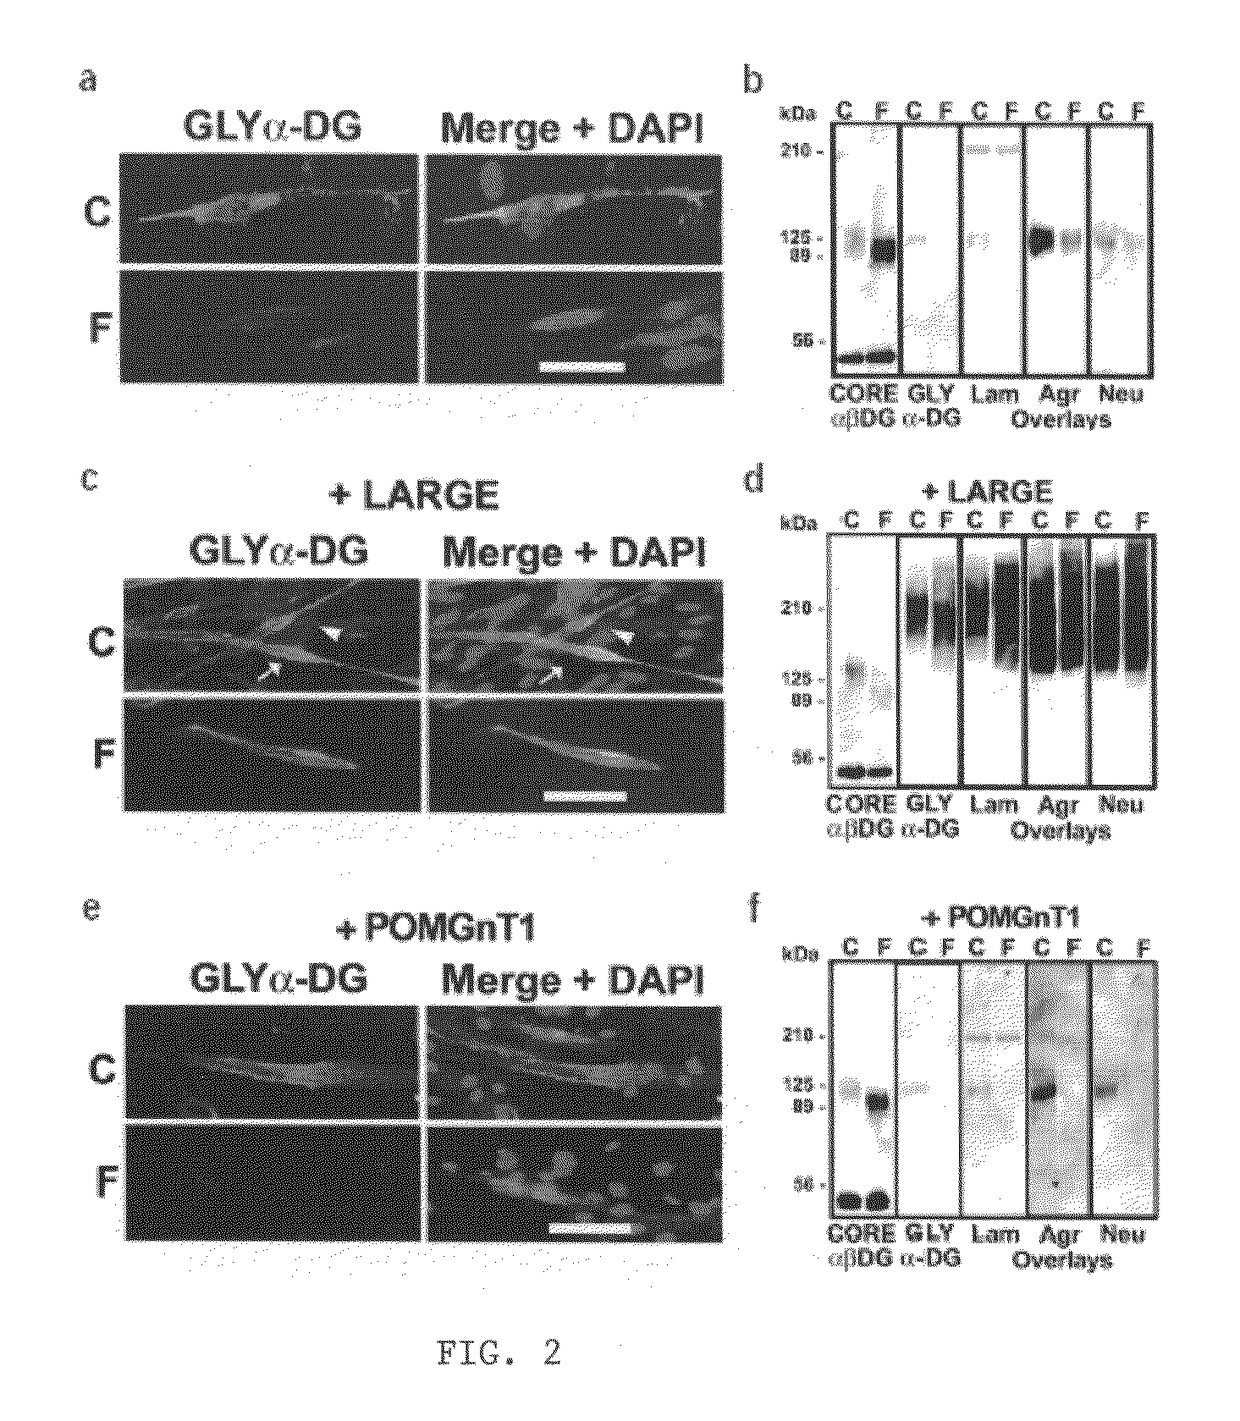 Increasing functional glycosylation of alpha-dystroglycan in the treatment of muscle degeneration